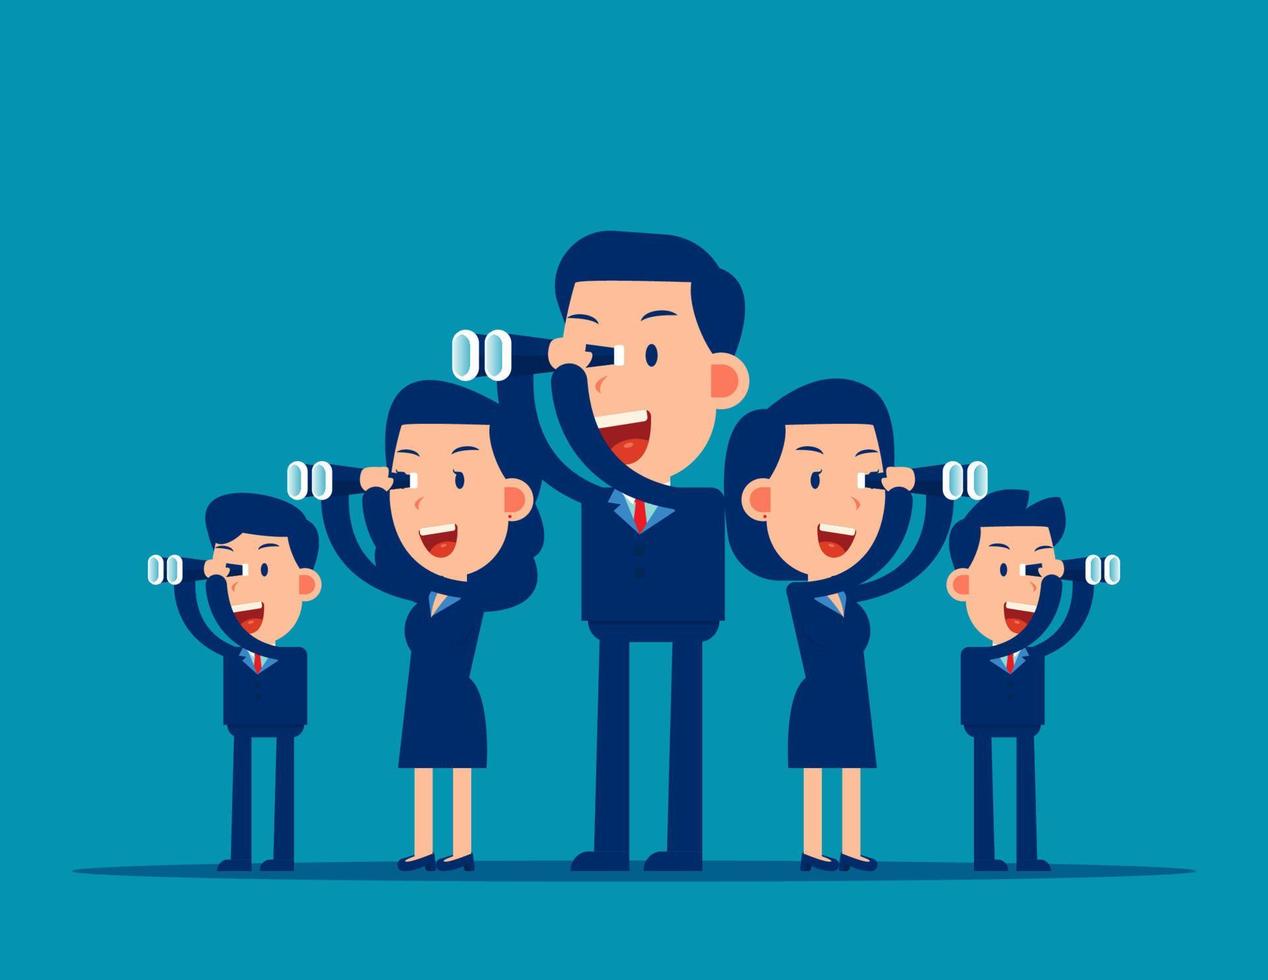 Team searching for success. Business vision concept. Flat business cartoon vector illustration style